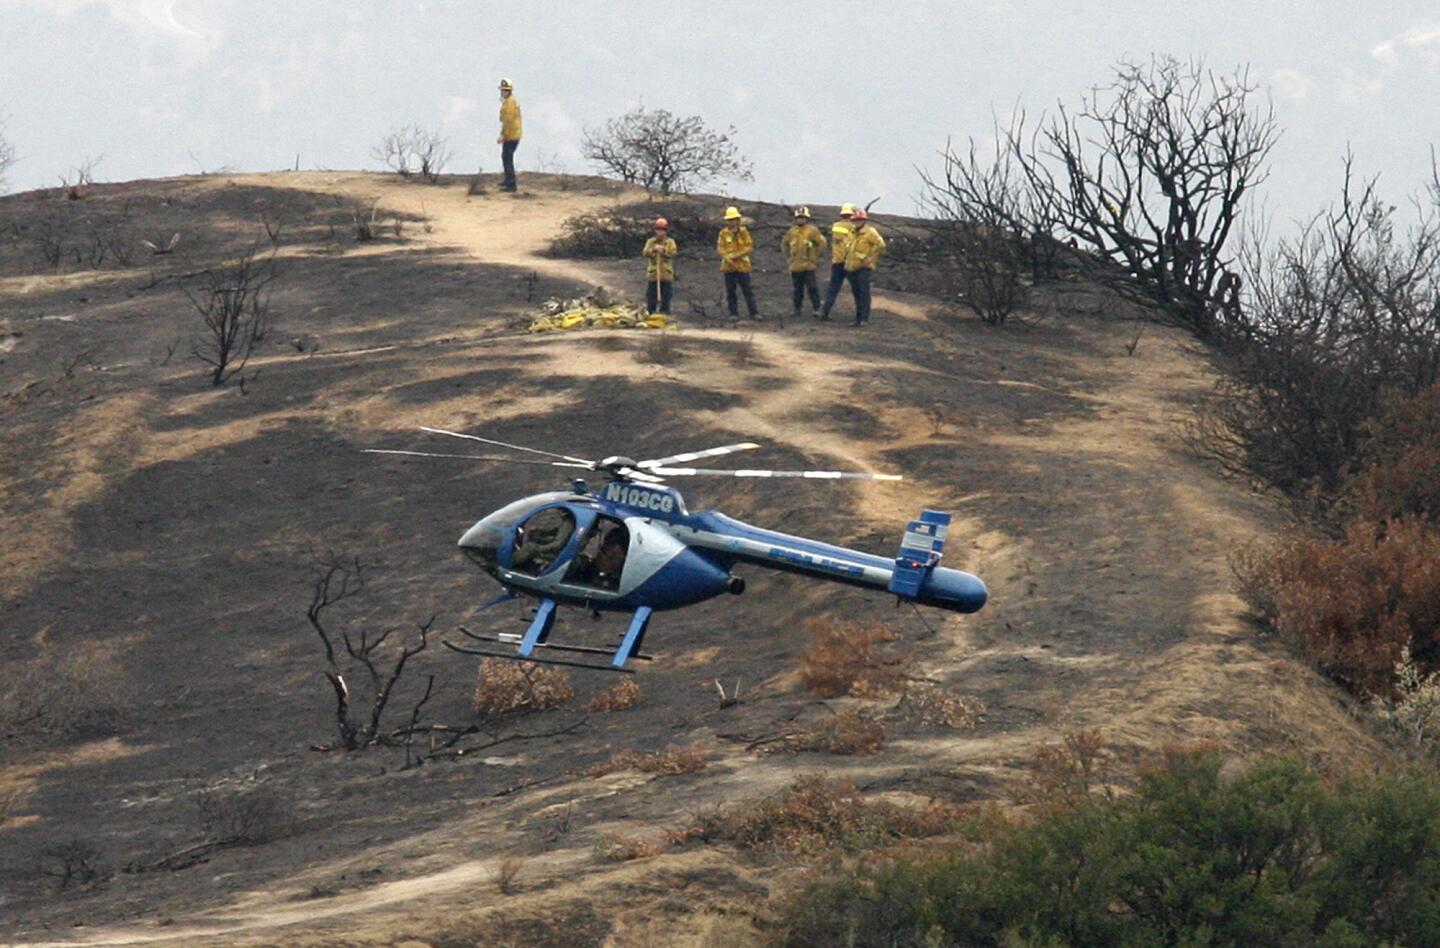 A Glendale police helicopter gets into position to assist Glendale fire fighters fly a net filled with fire hose left by firefighters last week after the brush fire in the hills back to the helipad at by the water tank at Scholl Canyon in Glendale on Thursday, May 9, 2013. The Glendale Police Department used their helicopter to assist the Glendale Fire Department retrieve nearly 5,000 feet of hose used to fight the brush fires in Glenoaks Canyon last week.